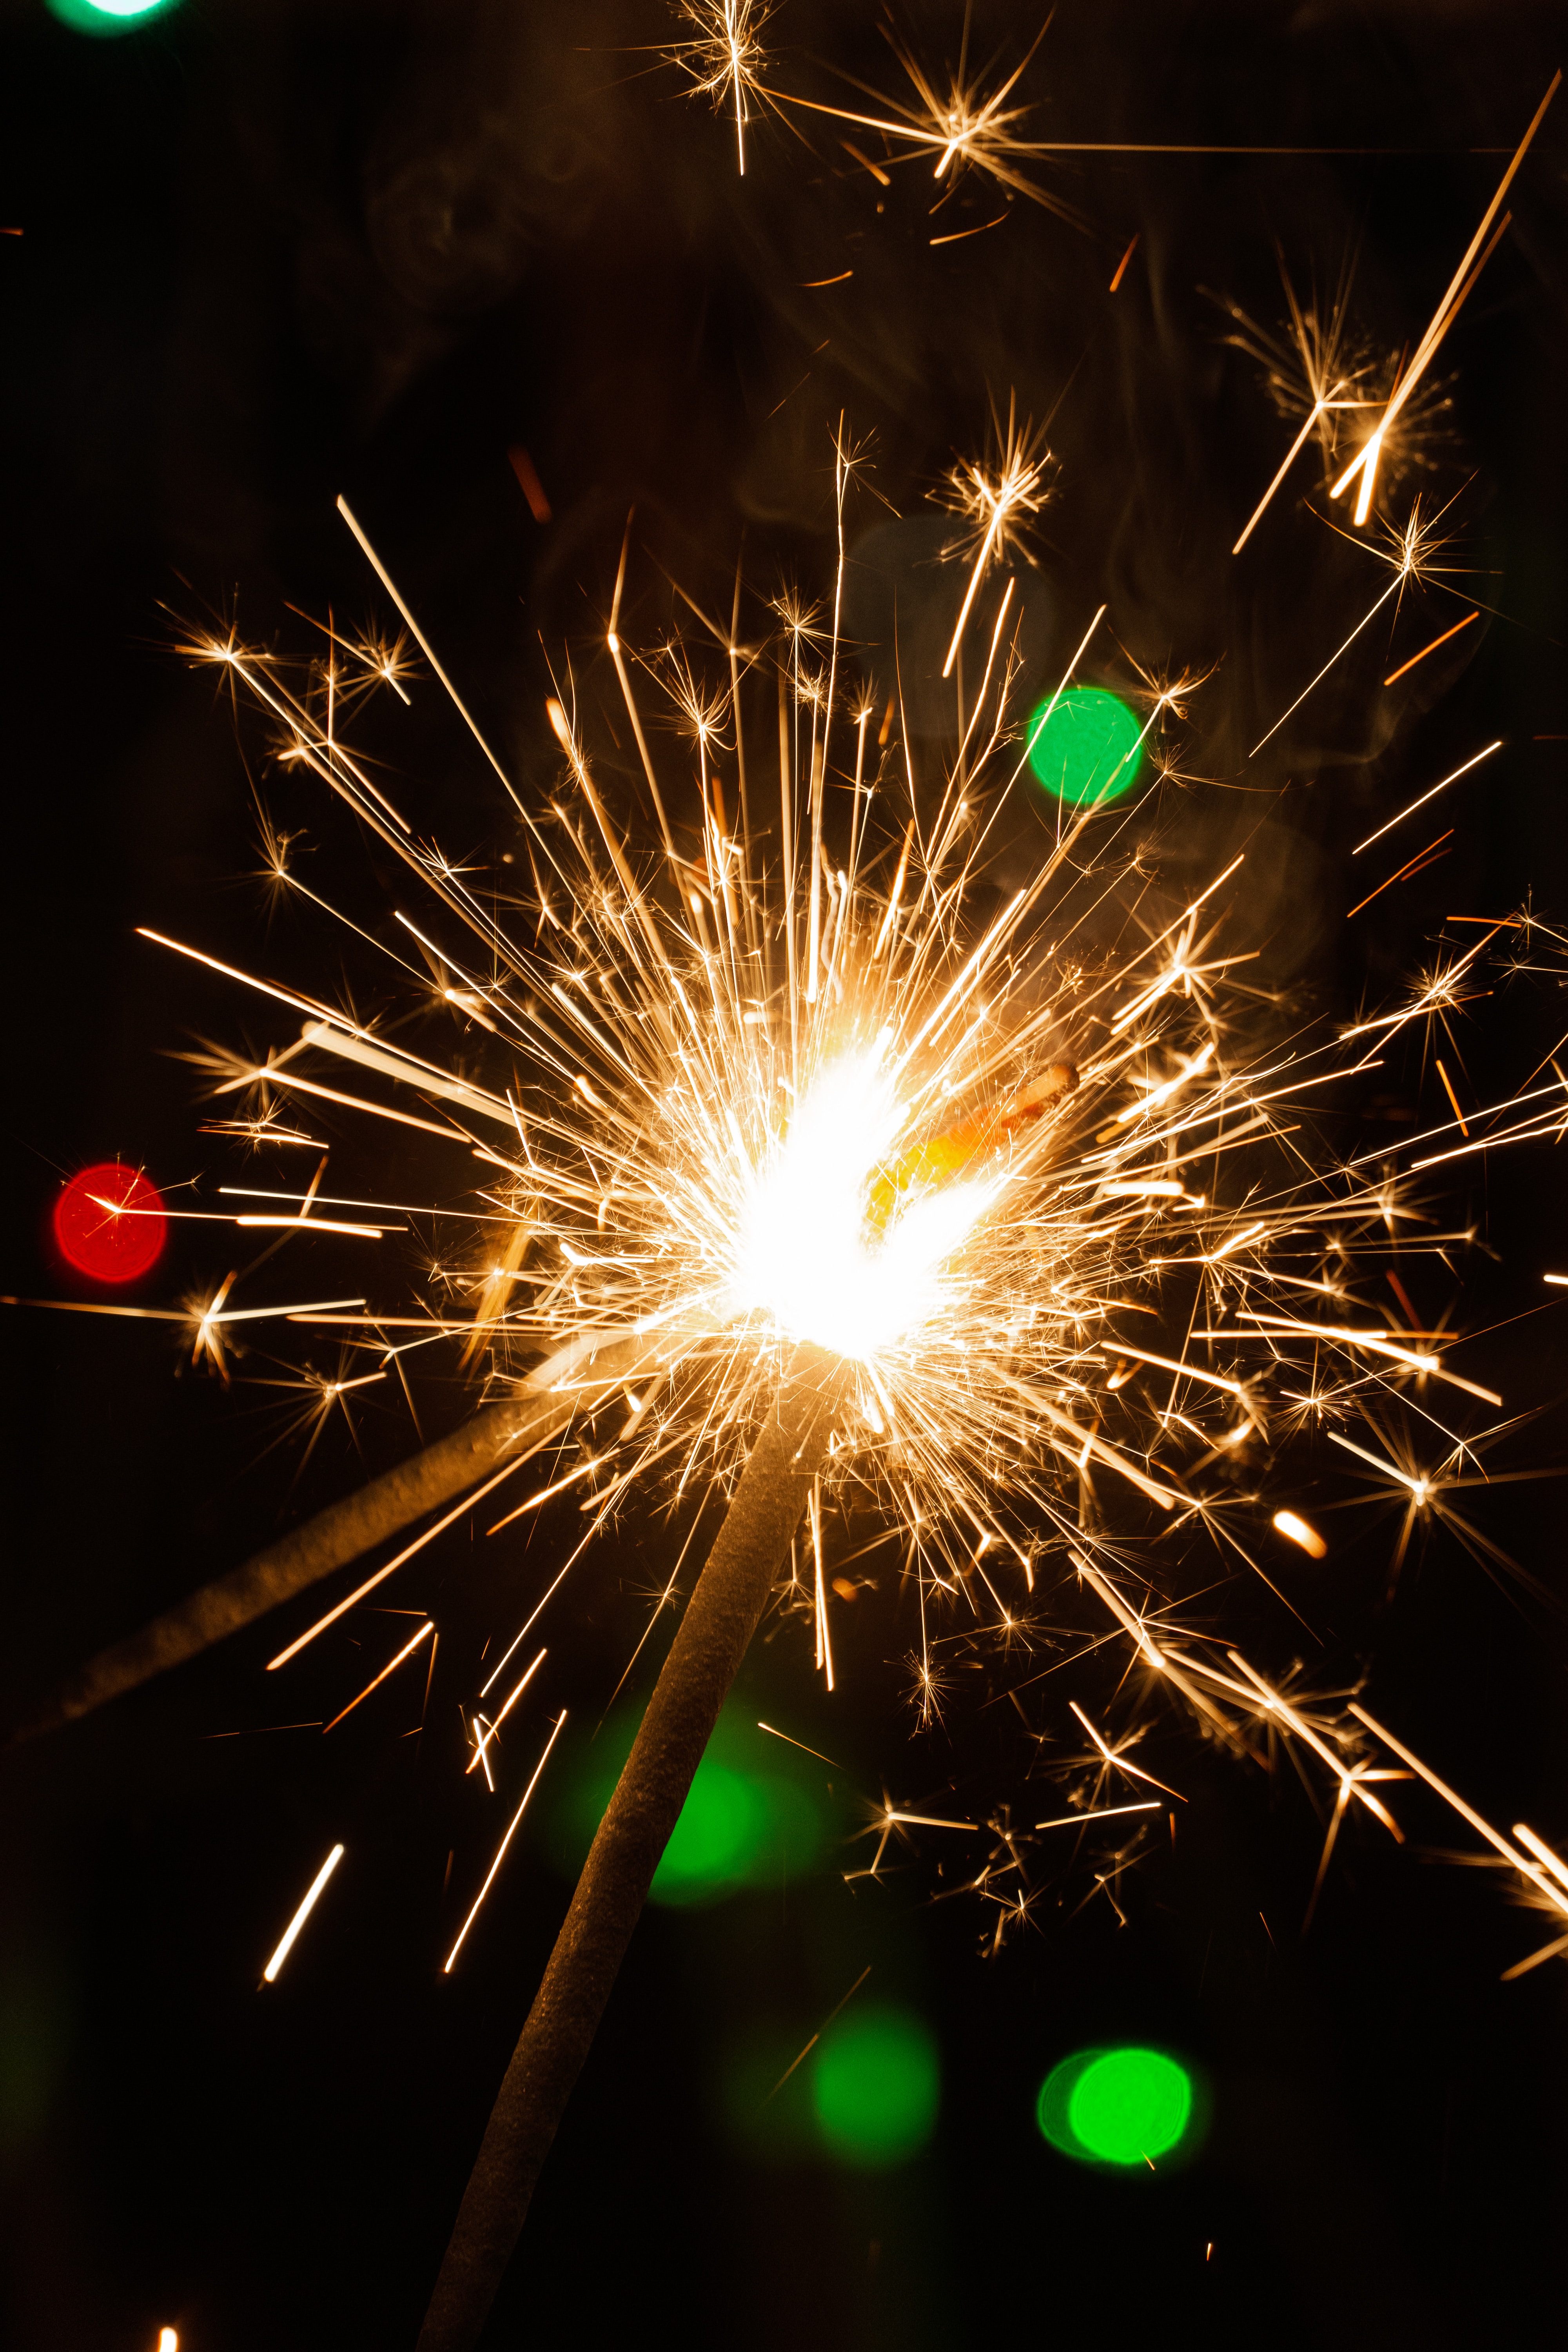 holidays, bengal lights, glare, sparks, holiday, sparklers Full HD